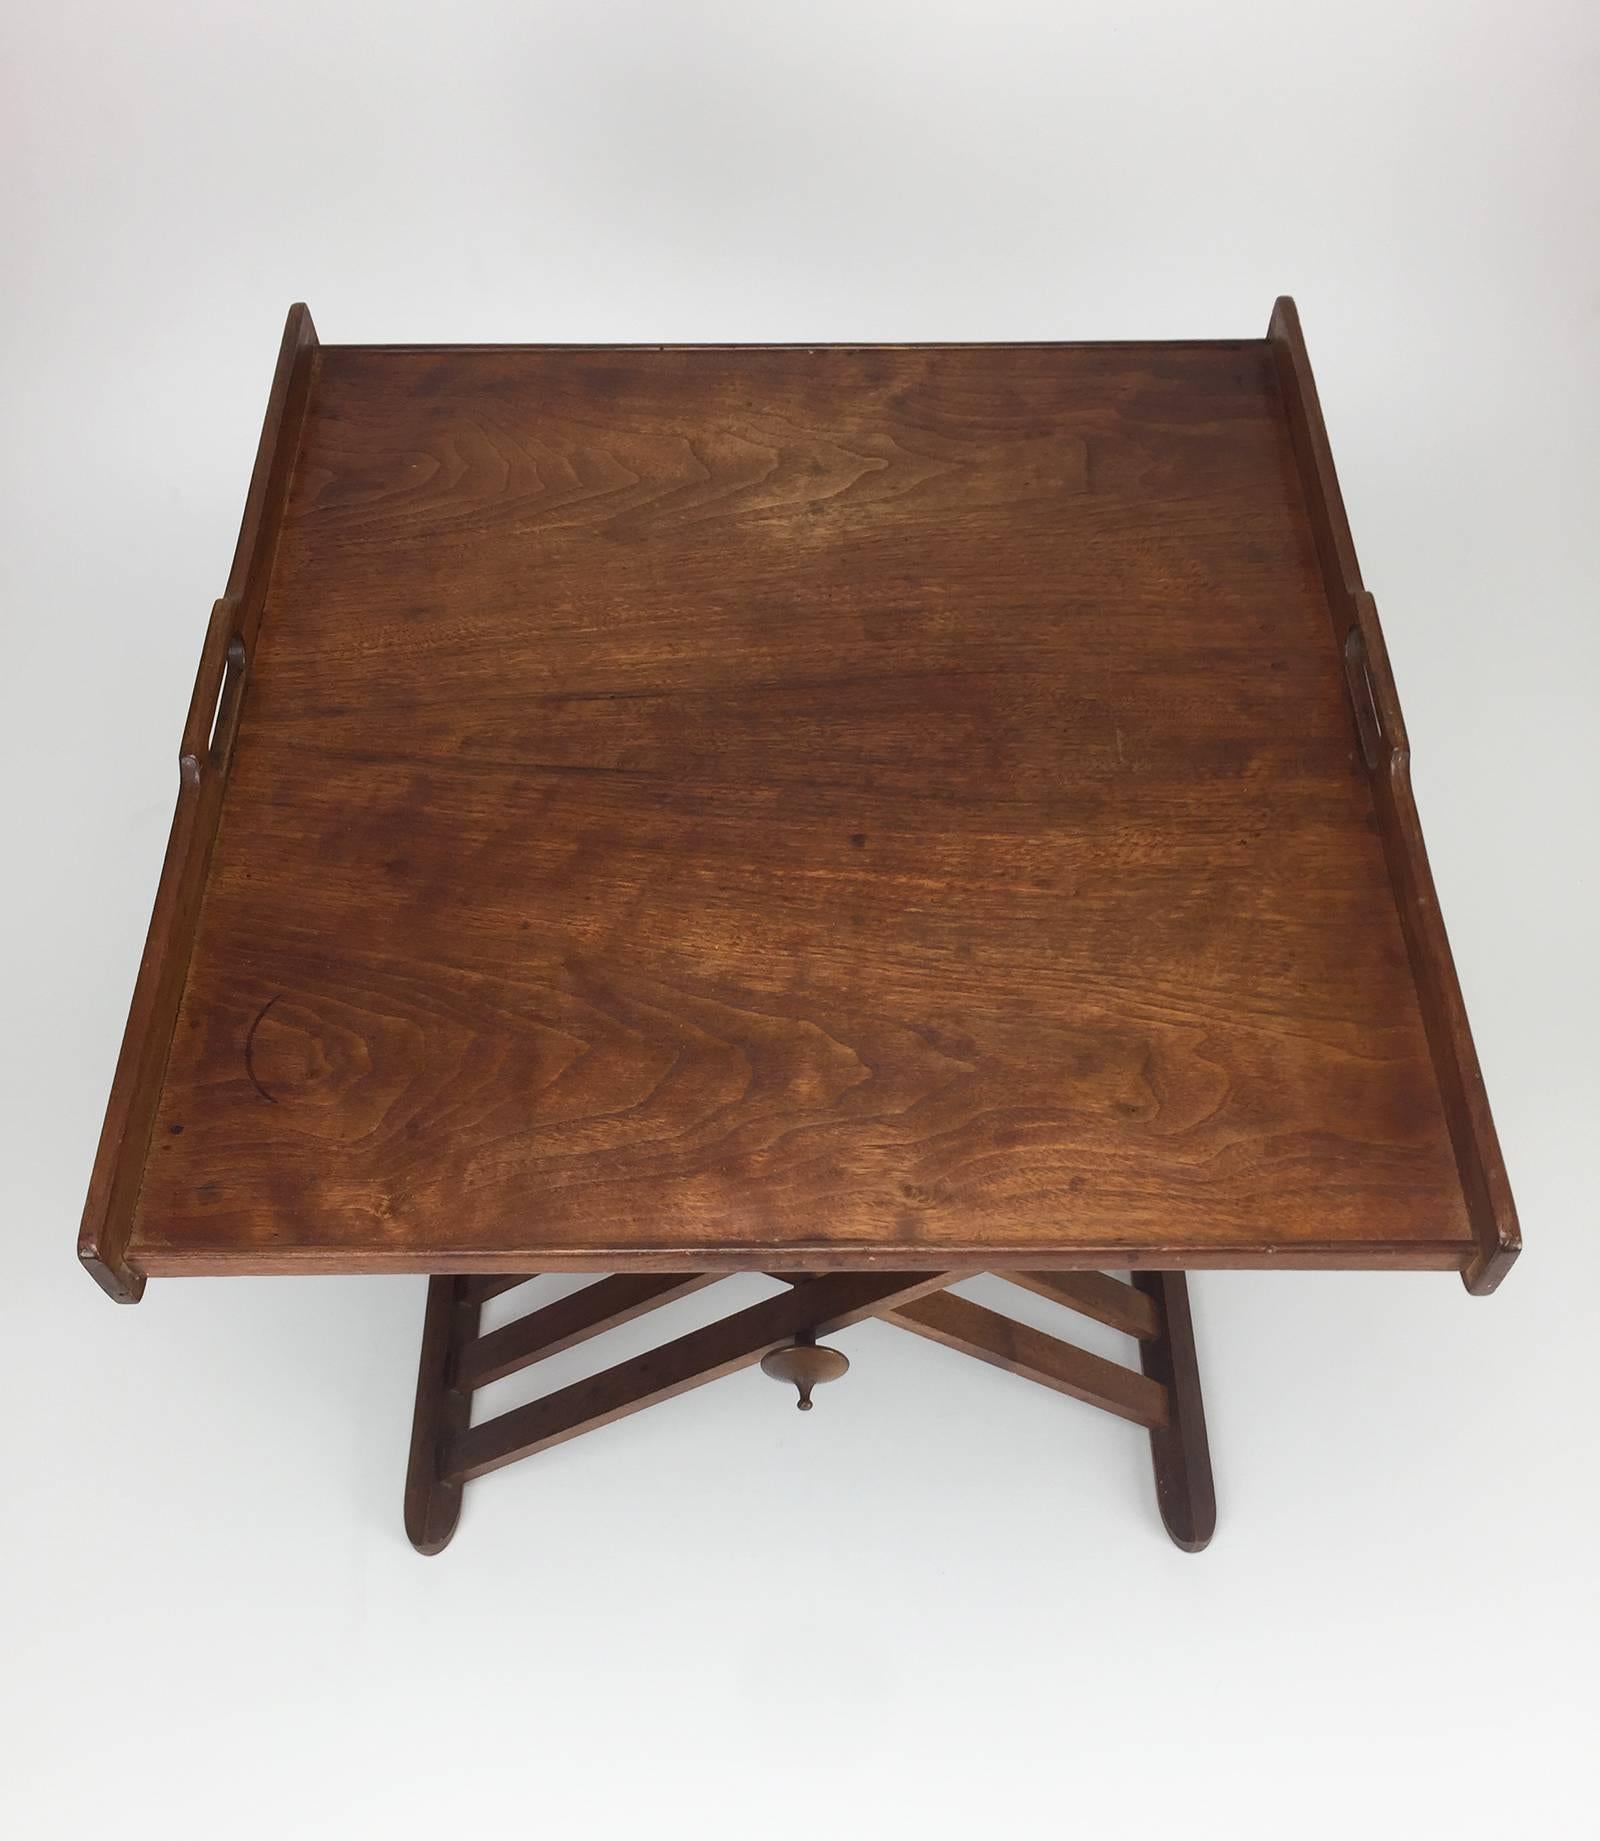 Folding Campaign tray table in walnut with carved handles and decorative finial at leg axis. Designed by Stewart MacDougall for Drexel.